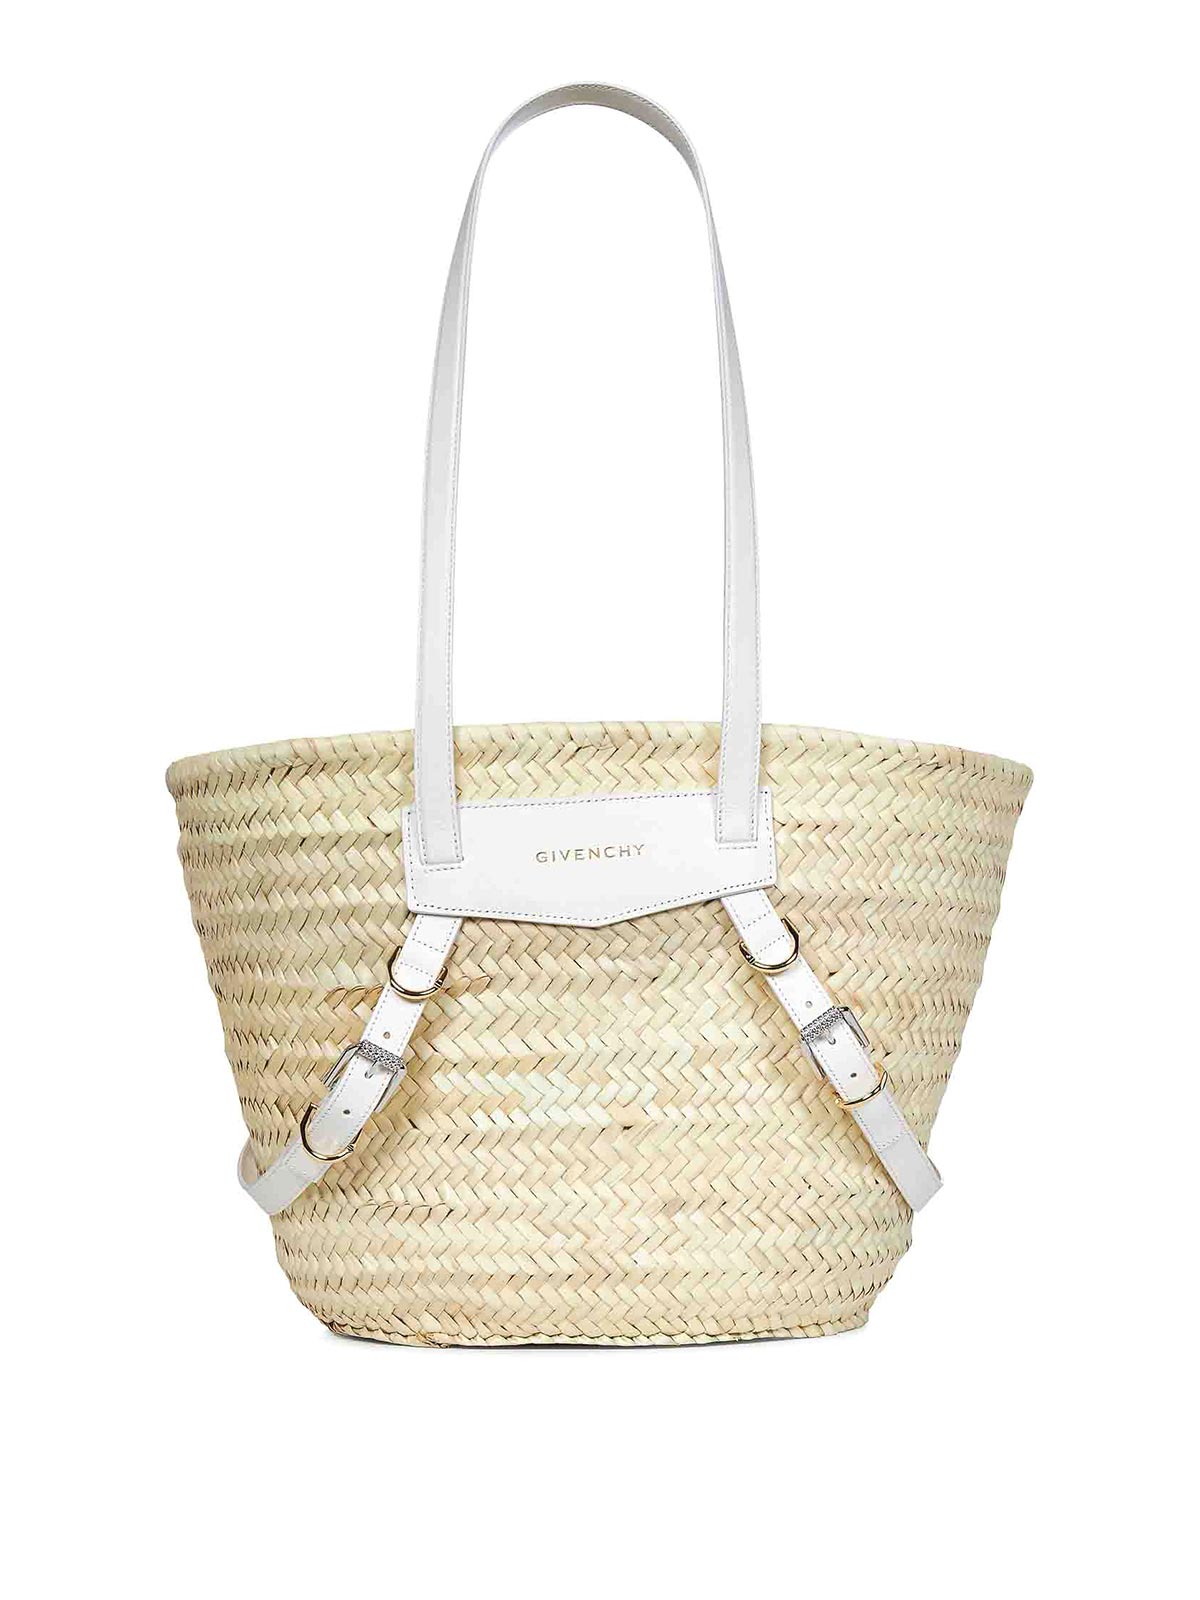 Givenchy Raffia Basket Bag With Leather Handles In White